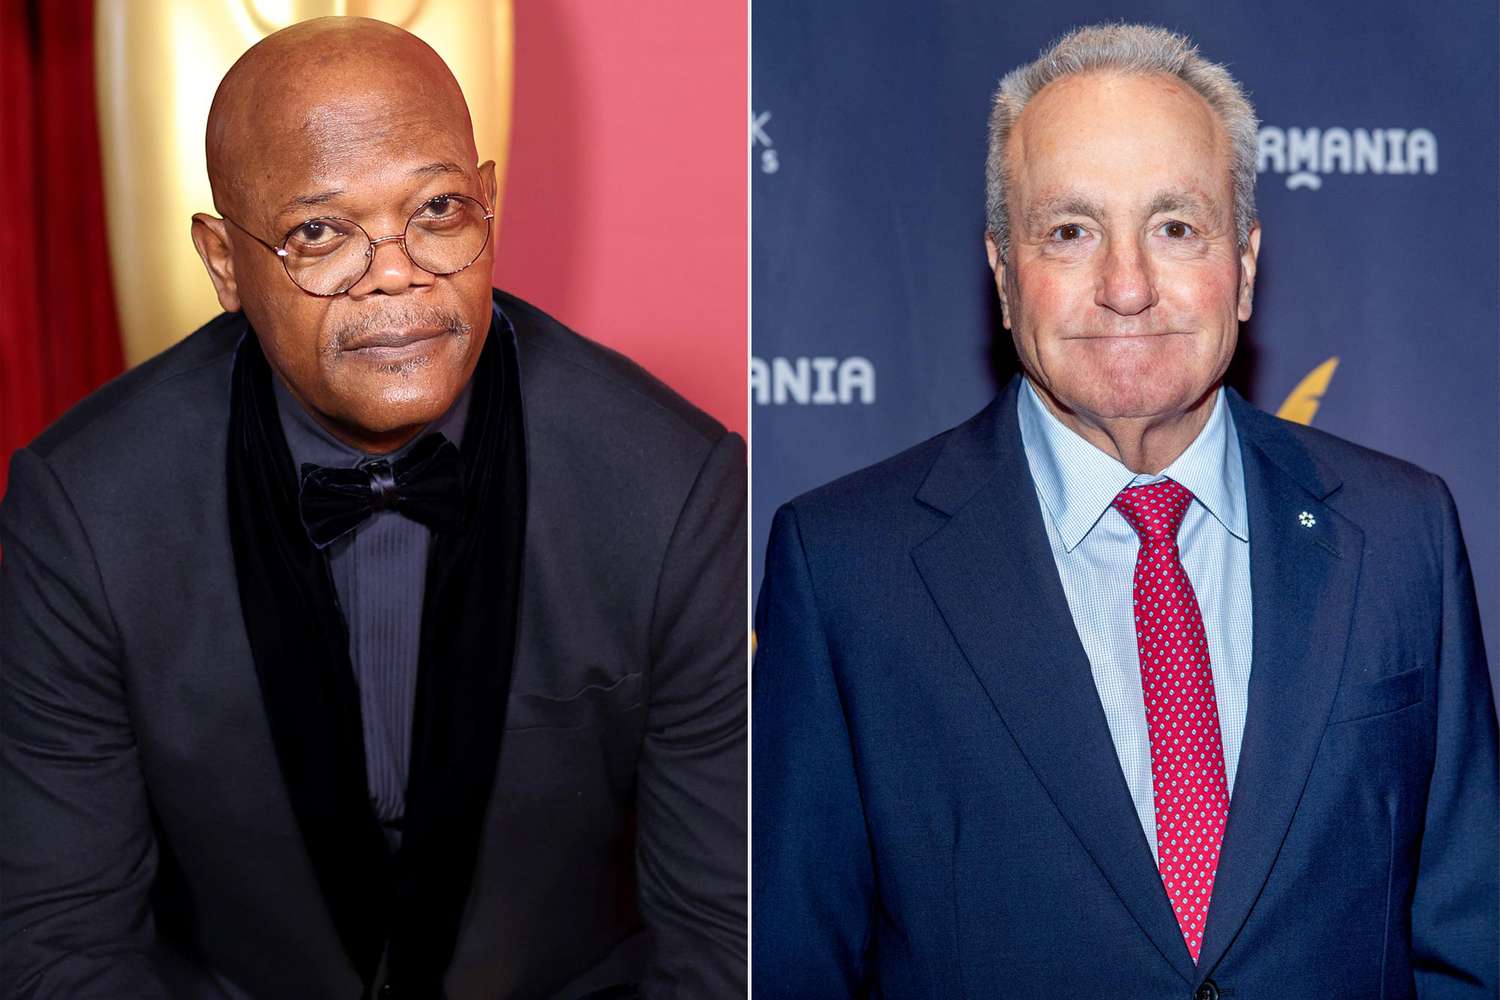 Samuel L. Jackson says Lorne Michaels assured him he's not banned from 'SNL'